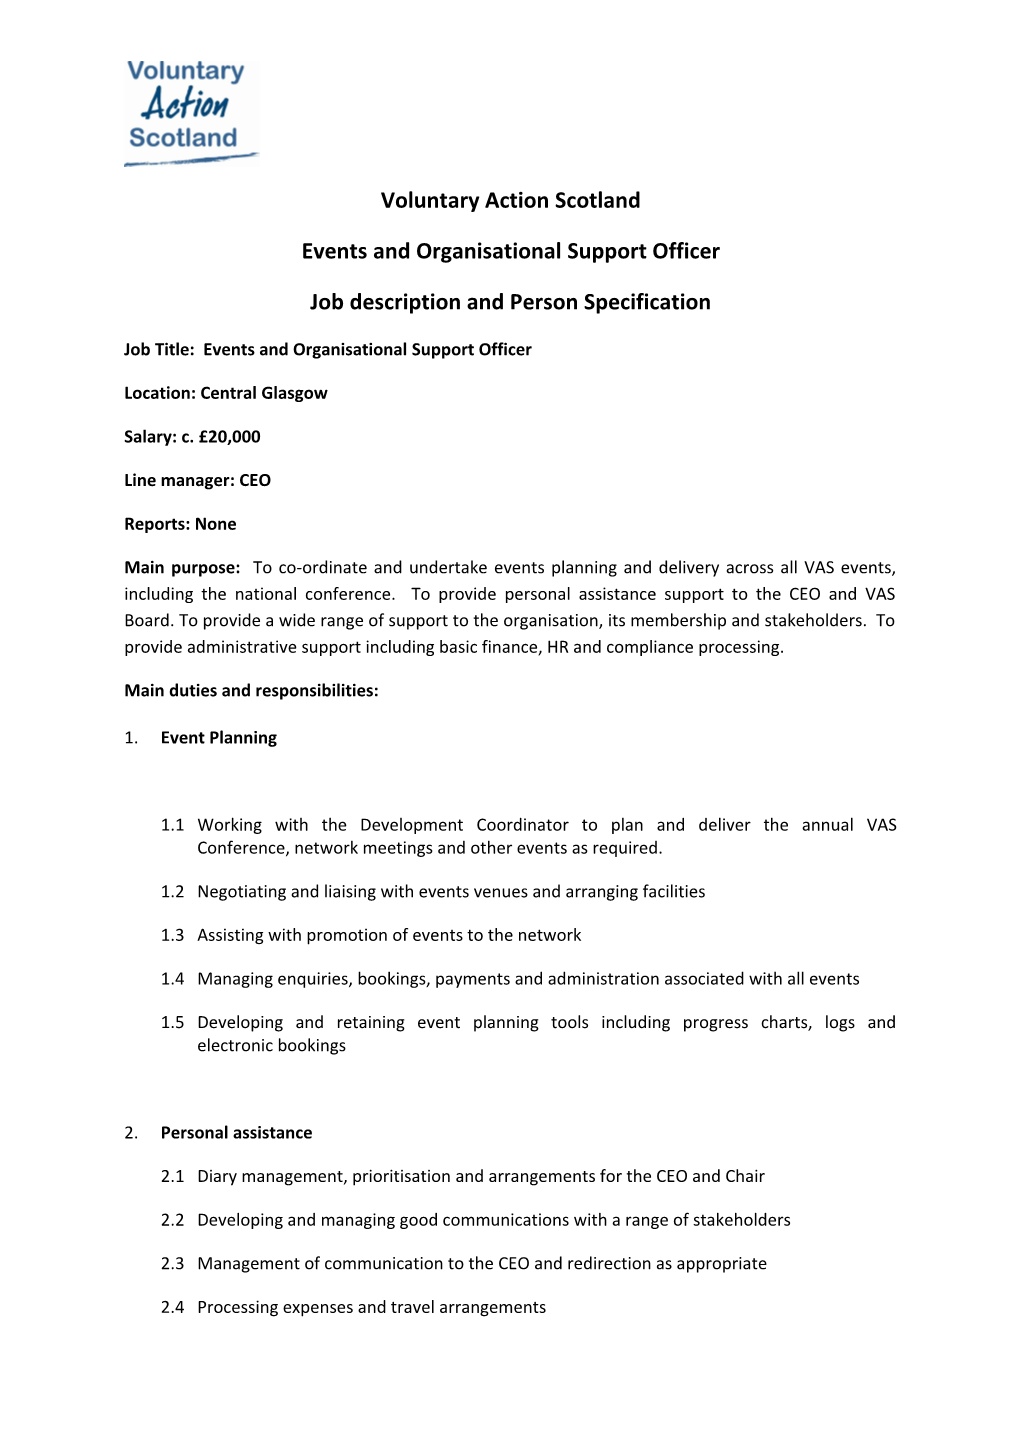 Events and Organisational Support Officer